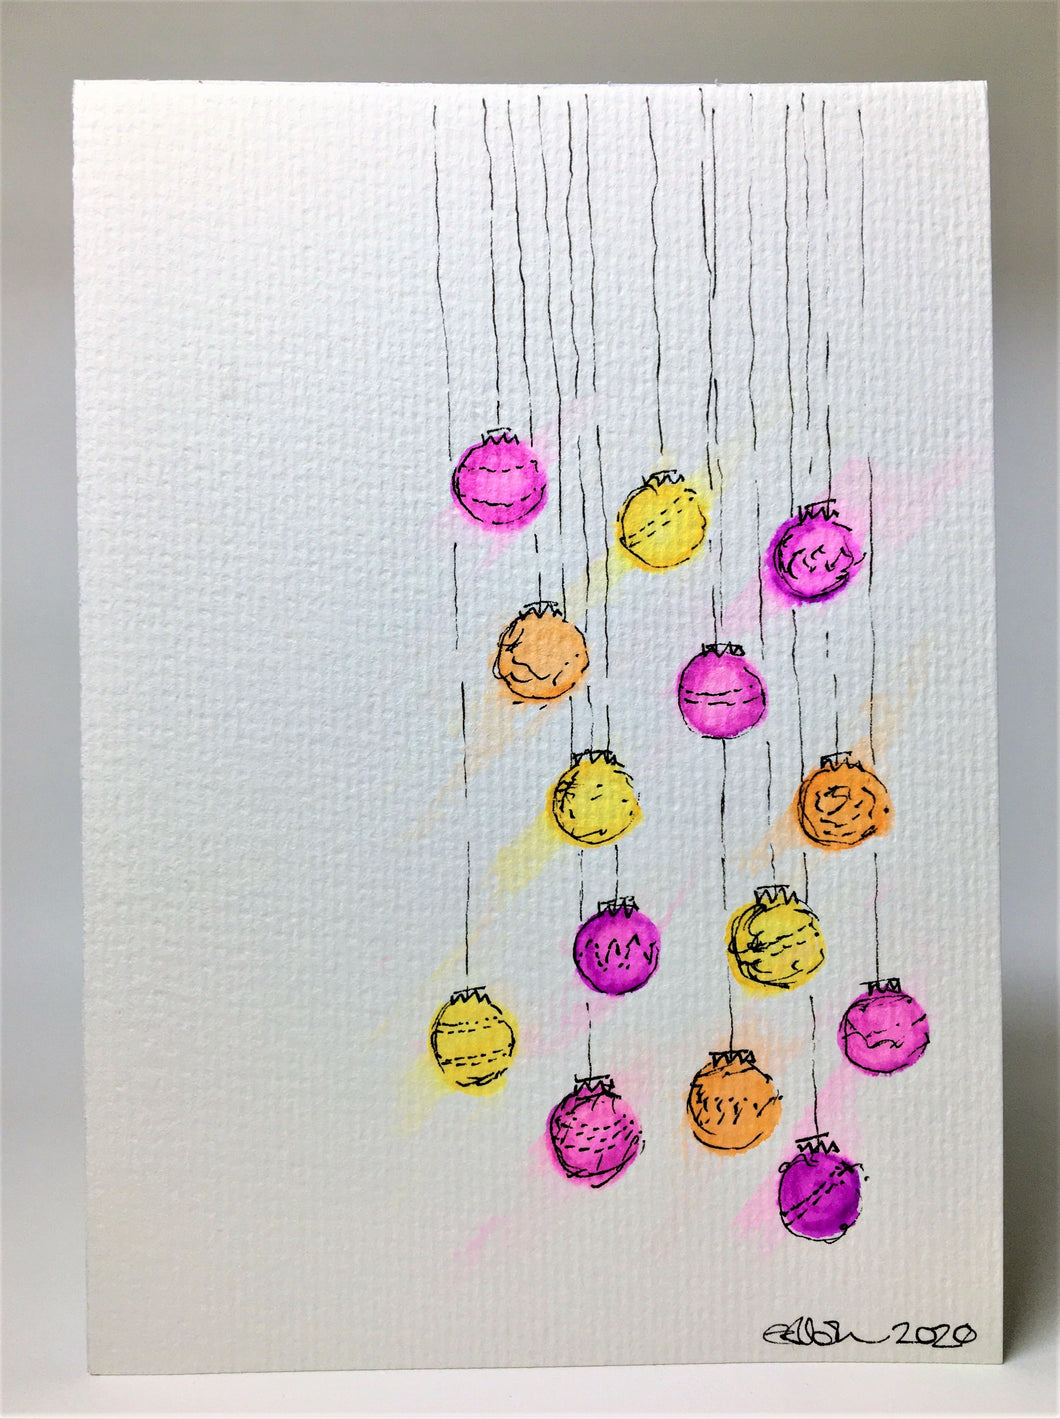 Original Hand Painted Christmas Card - Bauble Collection - Pink, Yellow and Orange - eDgE dEsiGn London